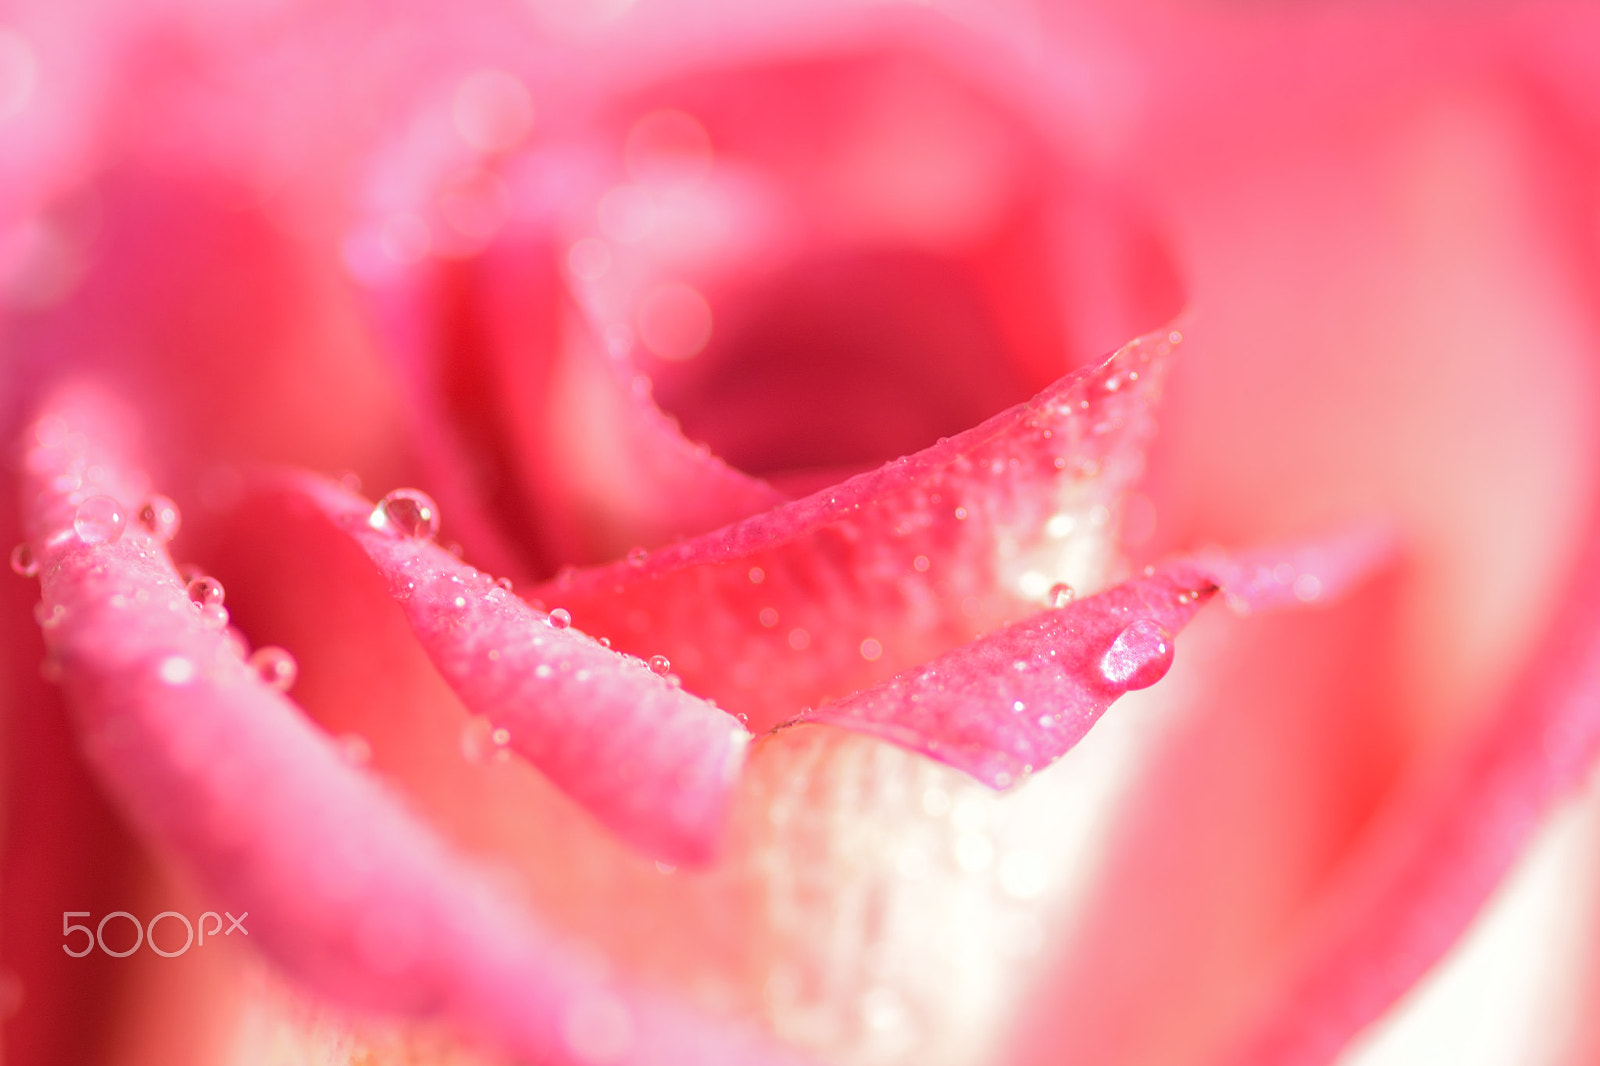 Nikon D5300 + Tamron SP 90mm F2.8 Di VC USD 1:1 Macro sample photo. Macro texture of pink rose with water droplets photography